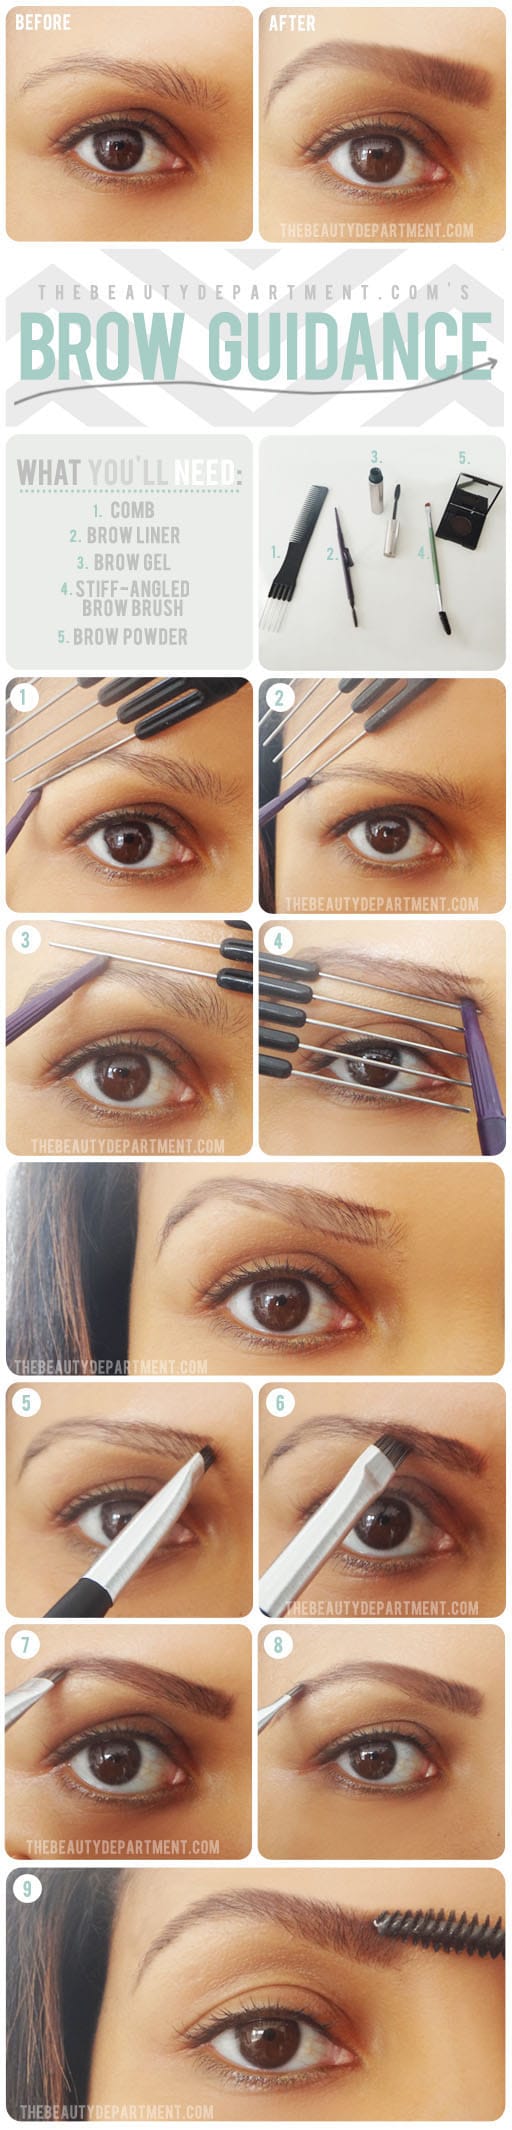 7 Best And Totally Genius Makeup Hacks Every Woman Should Know